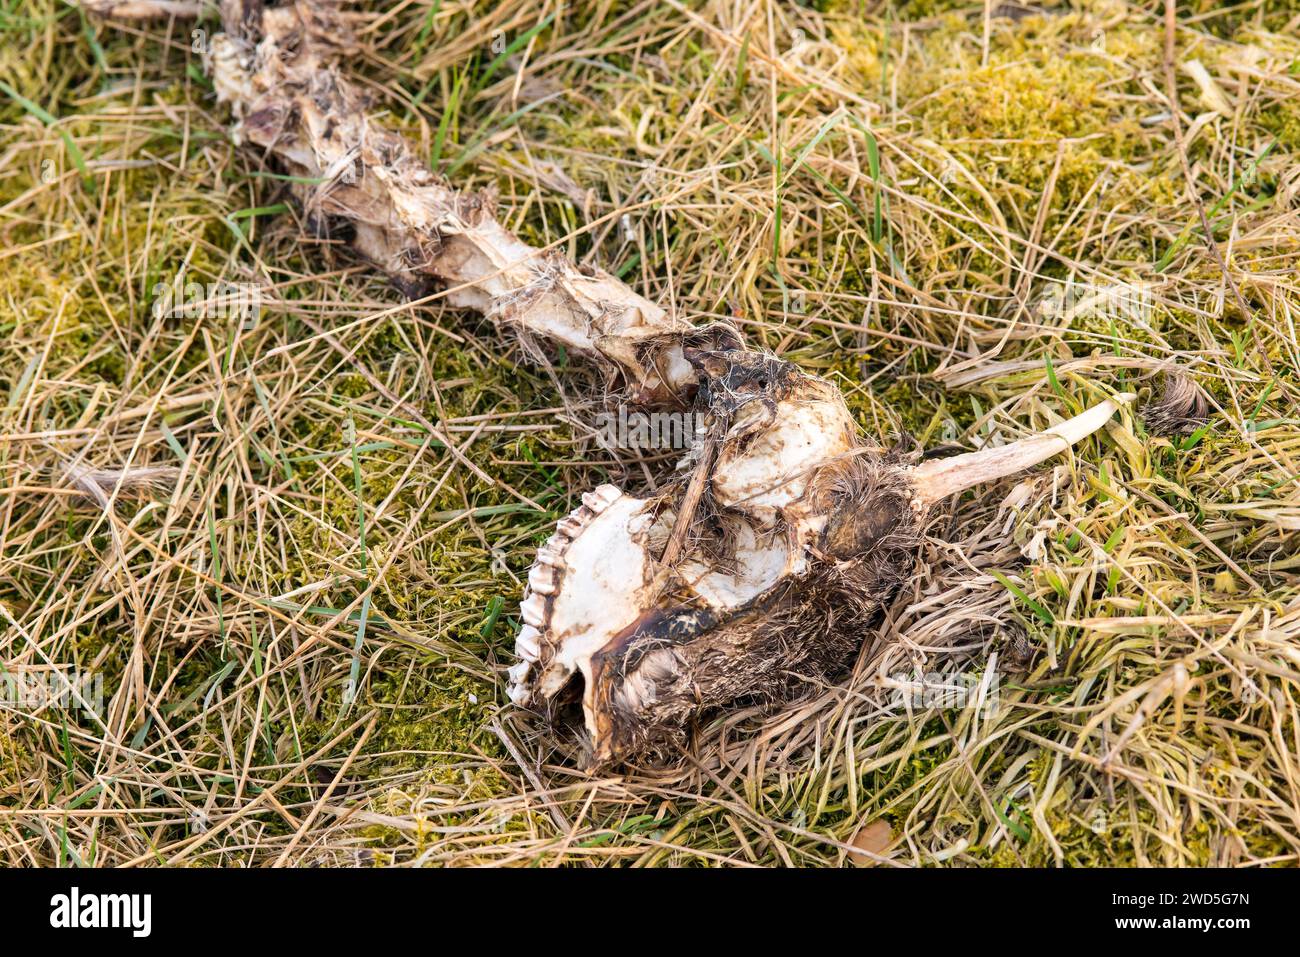 Remains, bones, skeletonised head and neck of a dead european roe deer (Capreolus capreolus) with remnants of fur lying in a meadow with dry grass Stock Photo